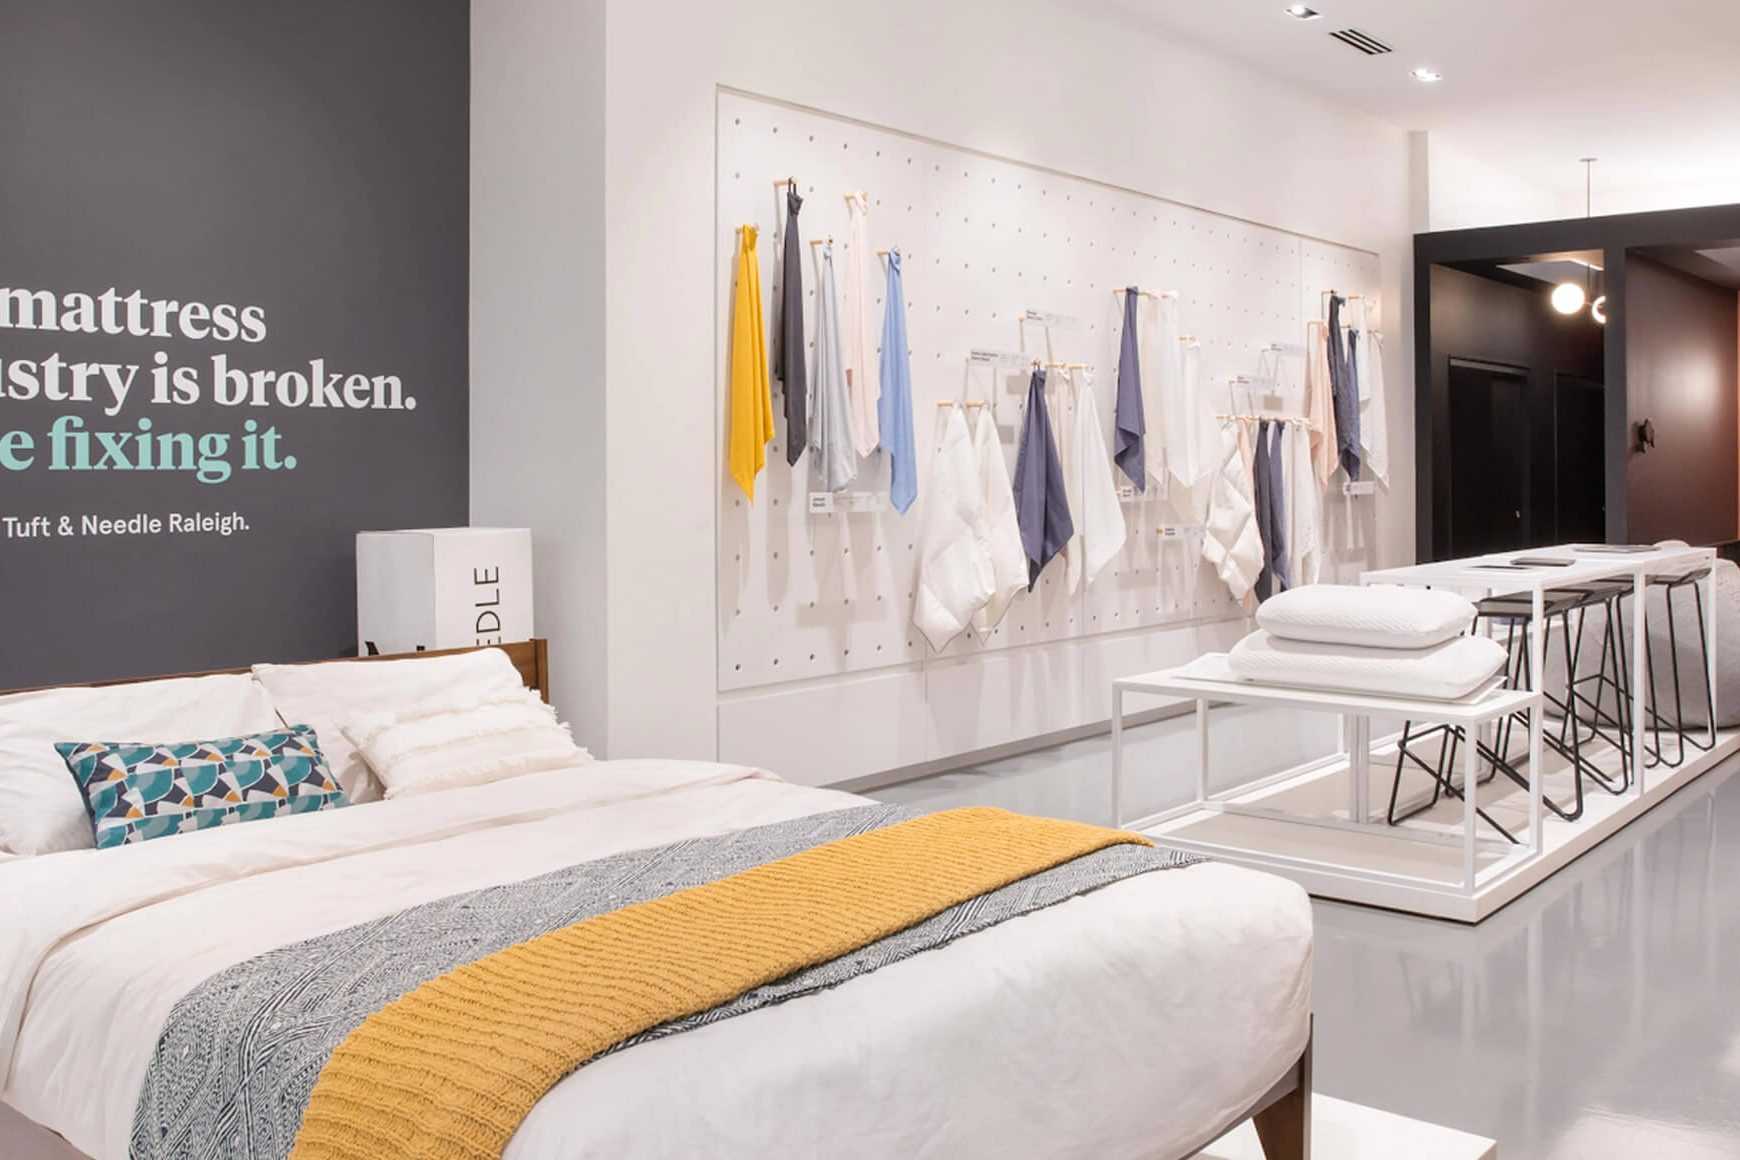 7 customer experience tips for D2C brands breaking into brick-and-mortar